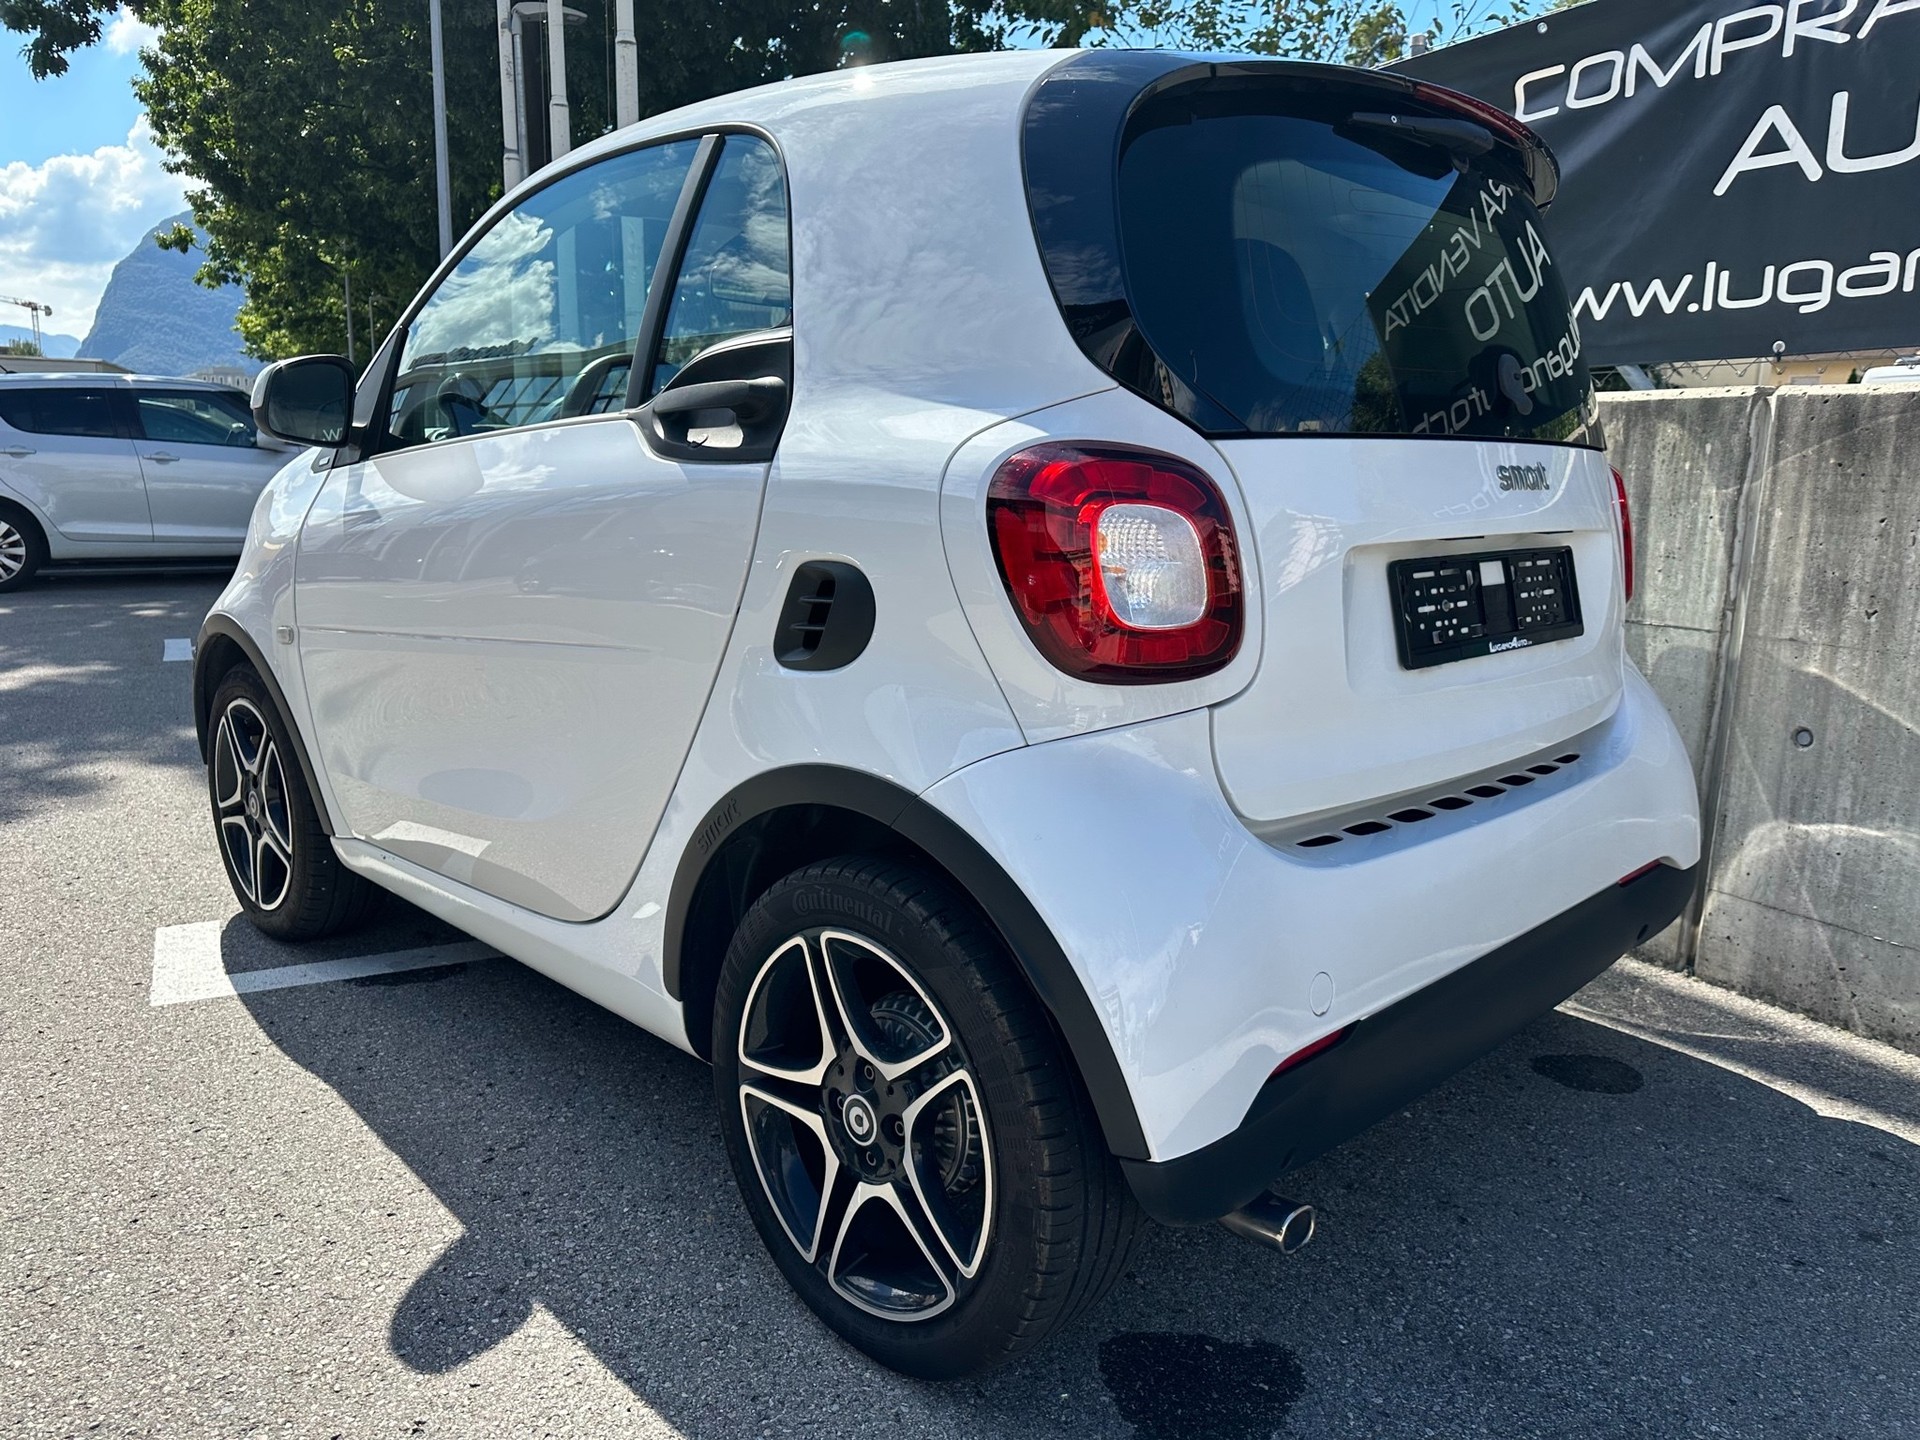 SMART fortwo citypassion twinmatic